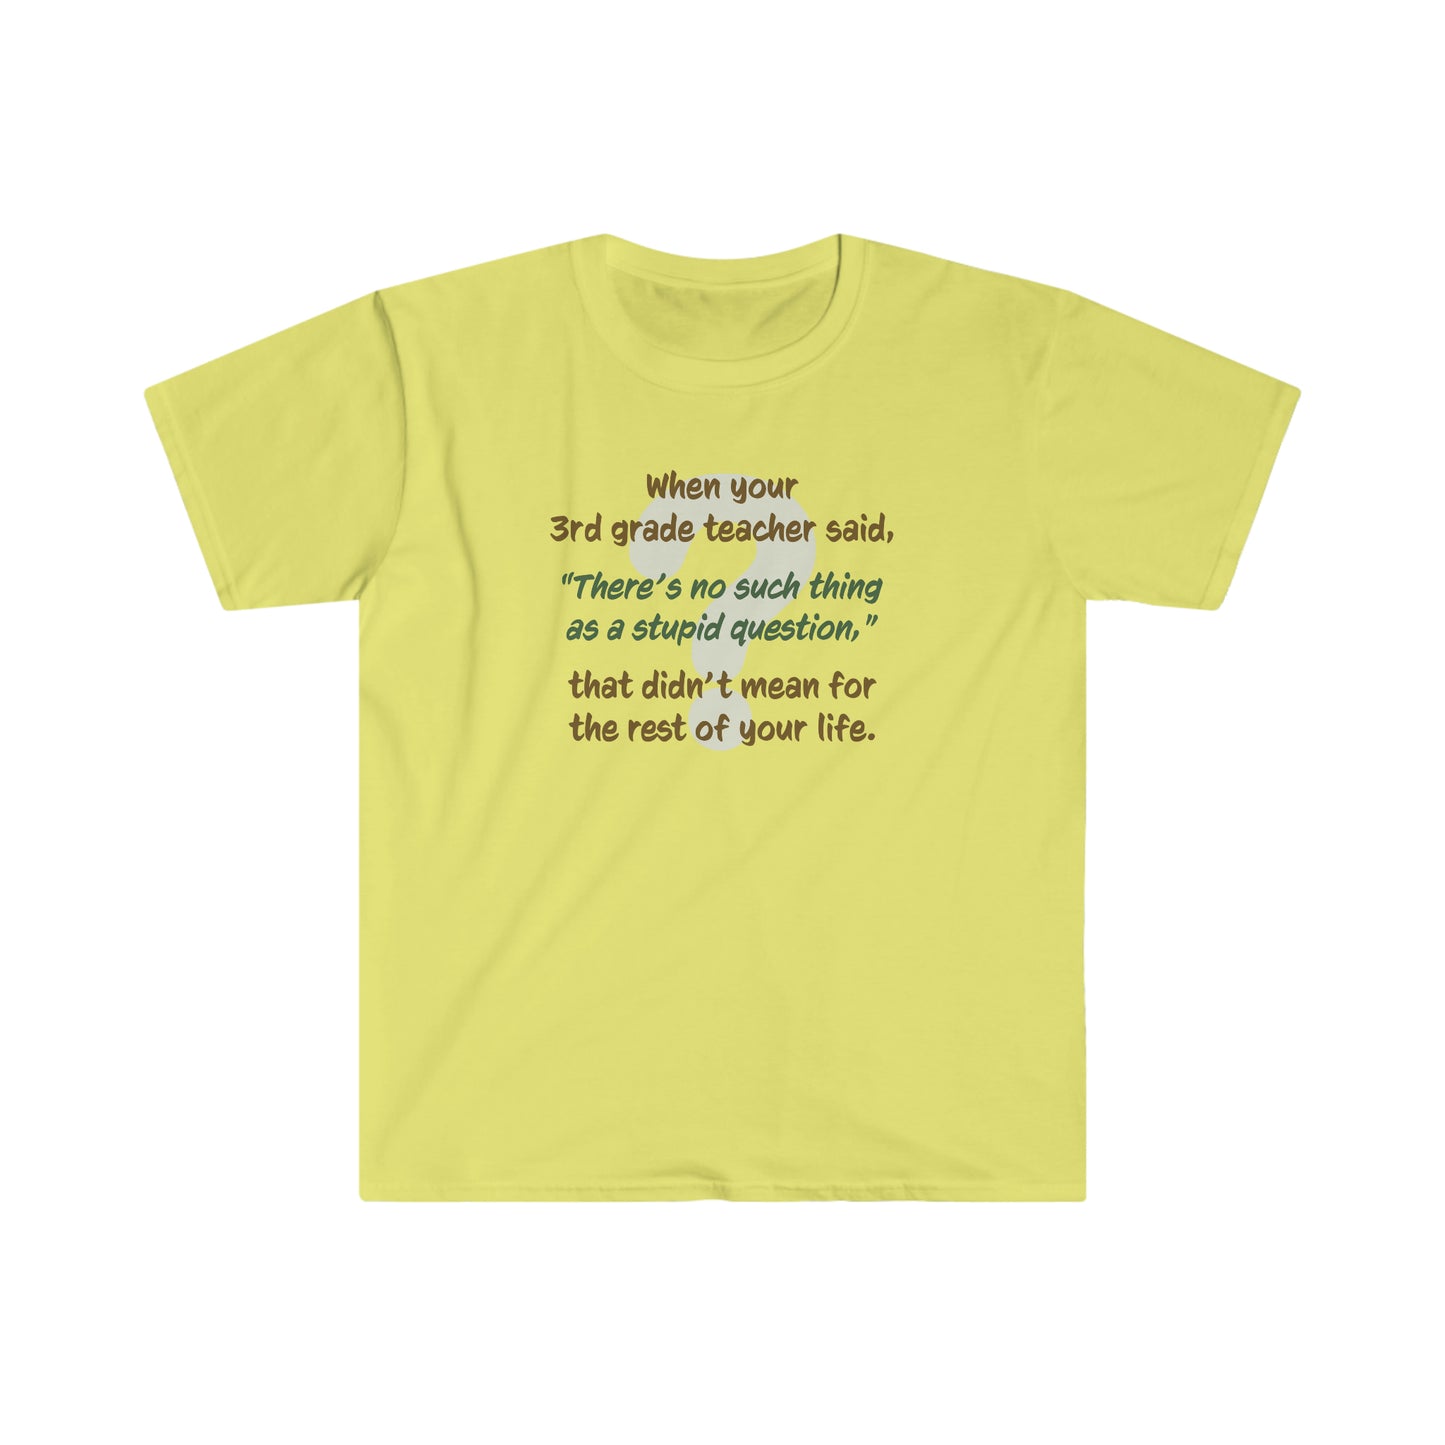 No Such Thing as a Stupid Question - Unisex T-Shirt